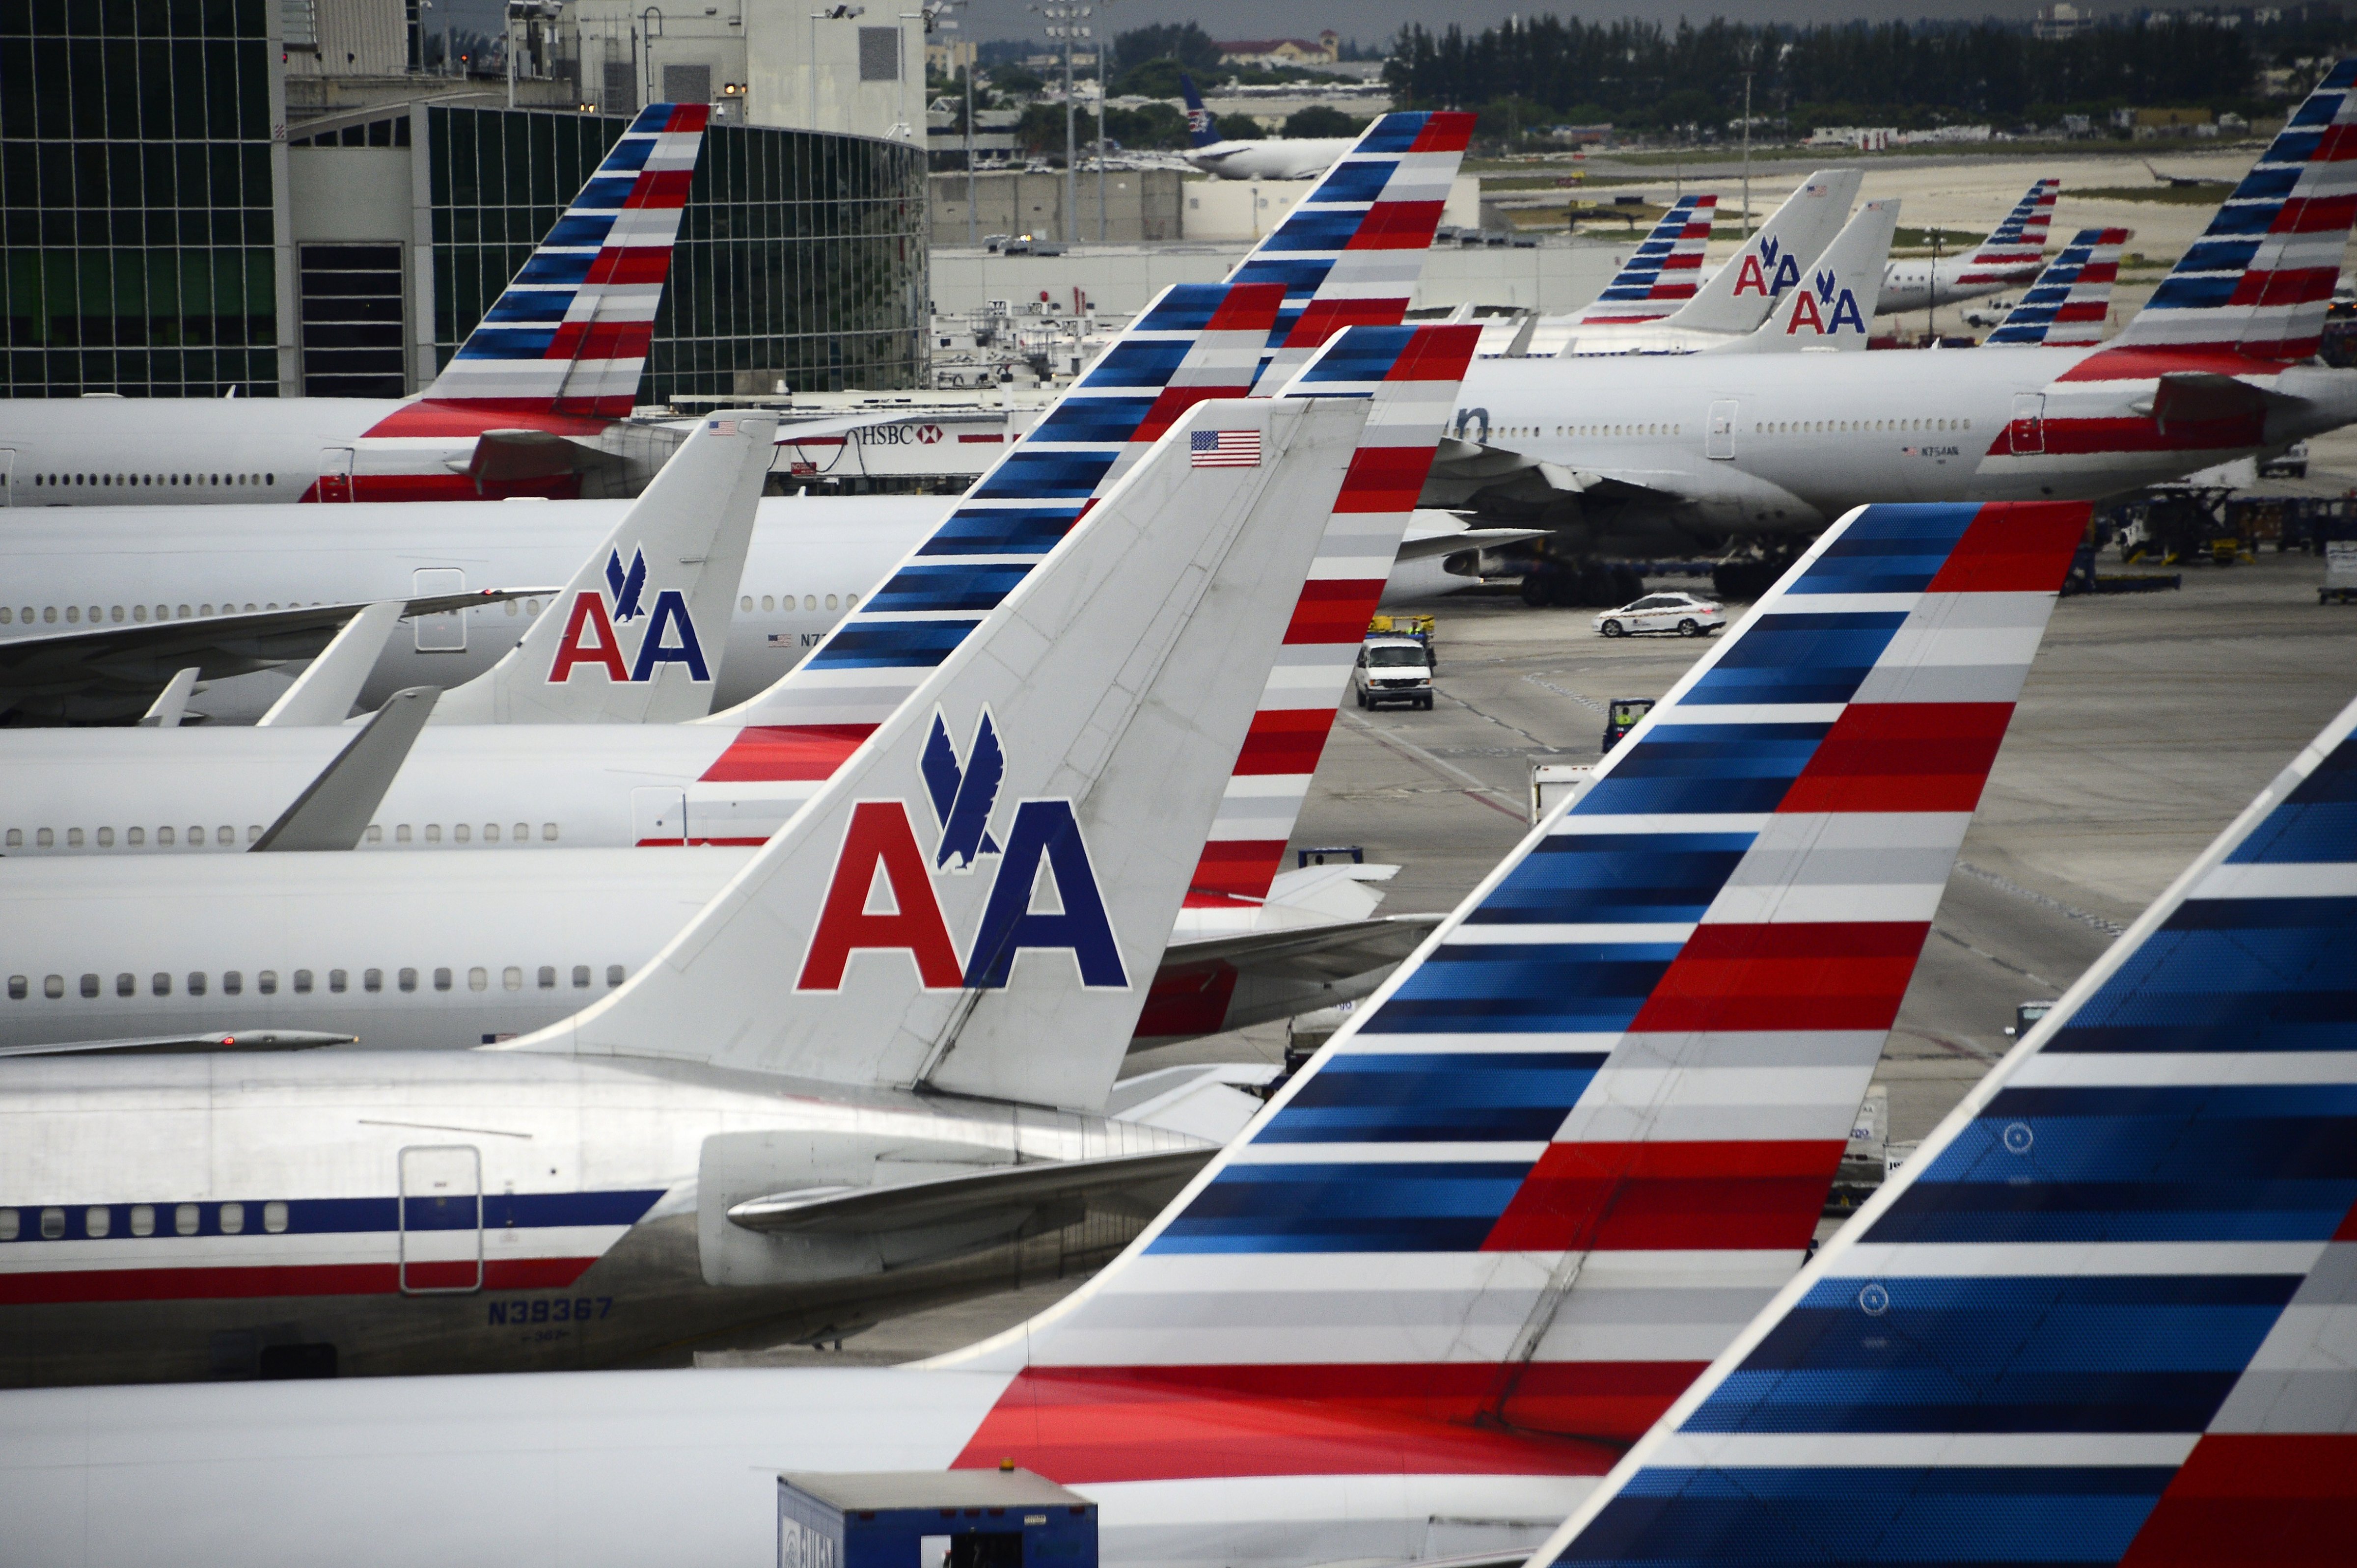 American Airlines passenger planes are seen on the tarmac at Miami International Airport in Miami, Florida, June 8, 2015. (ROBYN BECK–AFP/Getty Images)